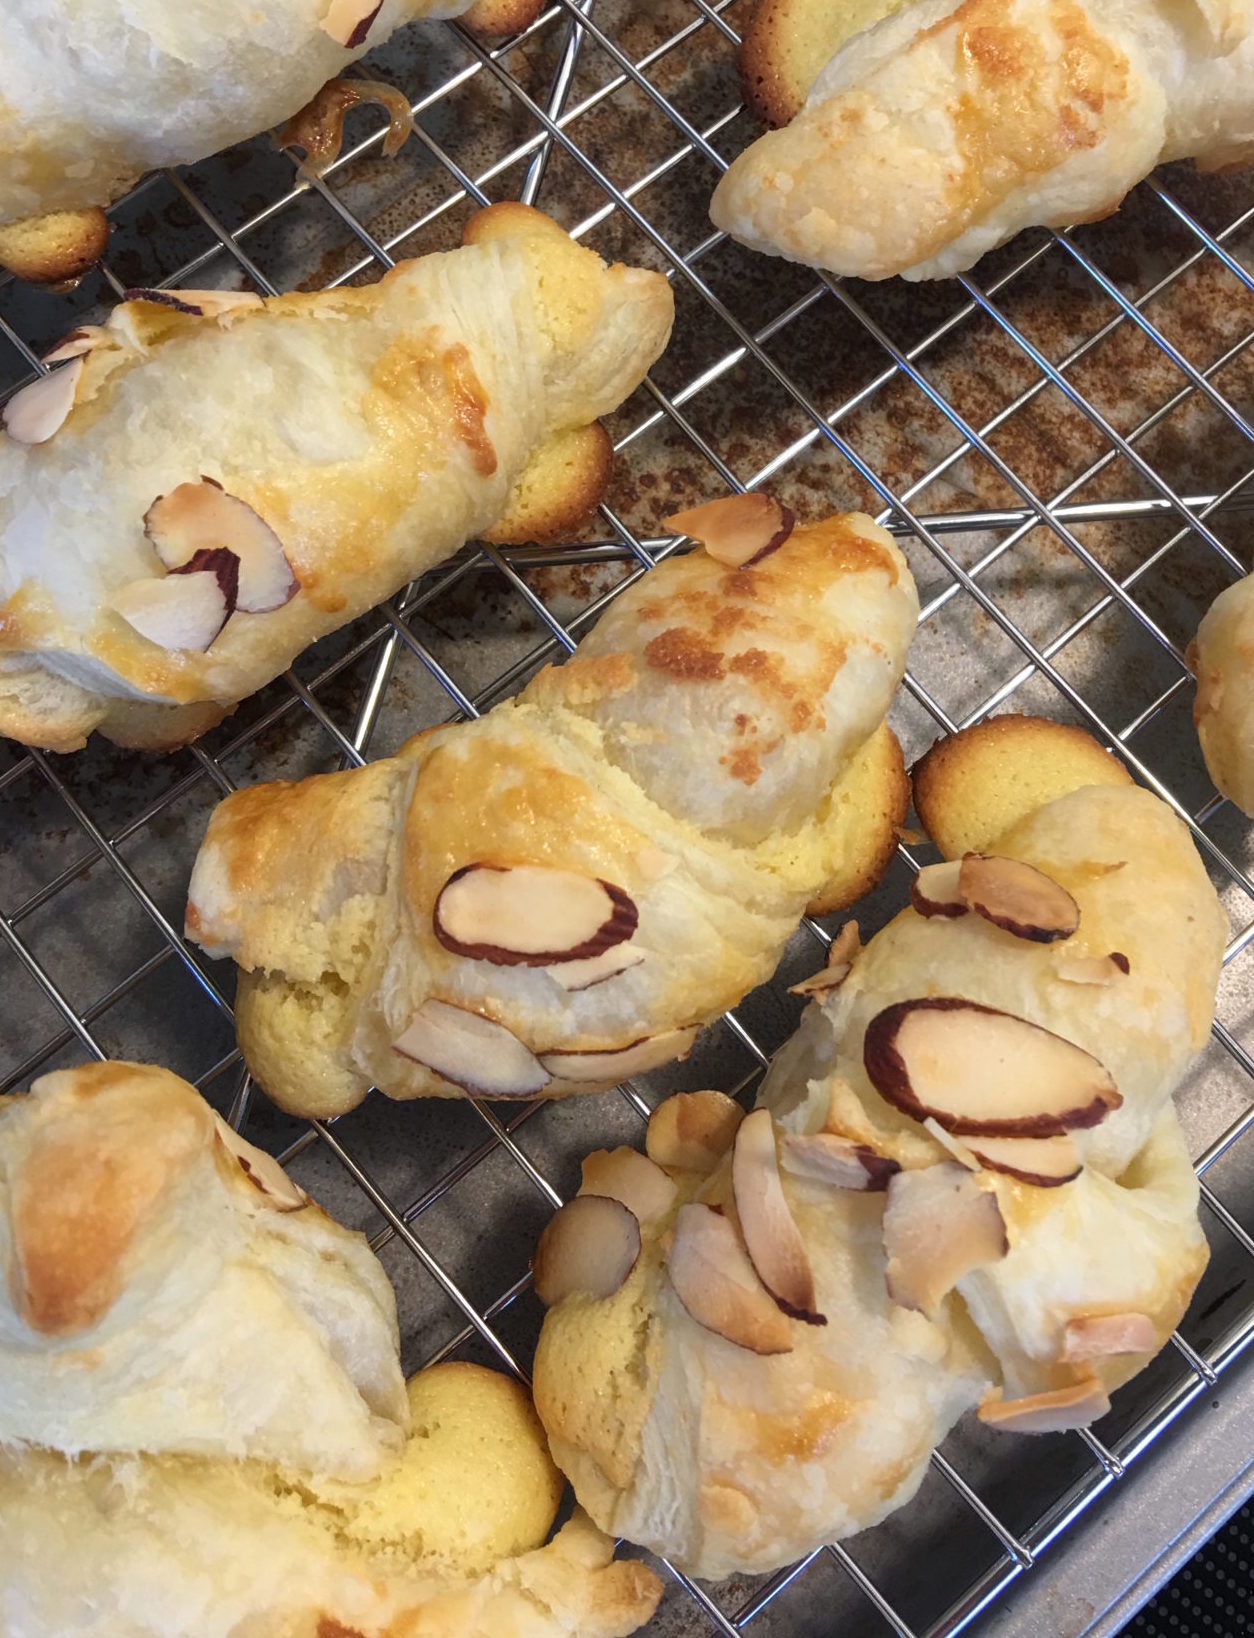 Hot from the oven Almond Croissant